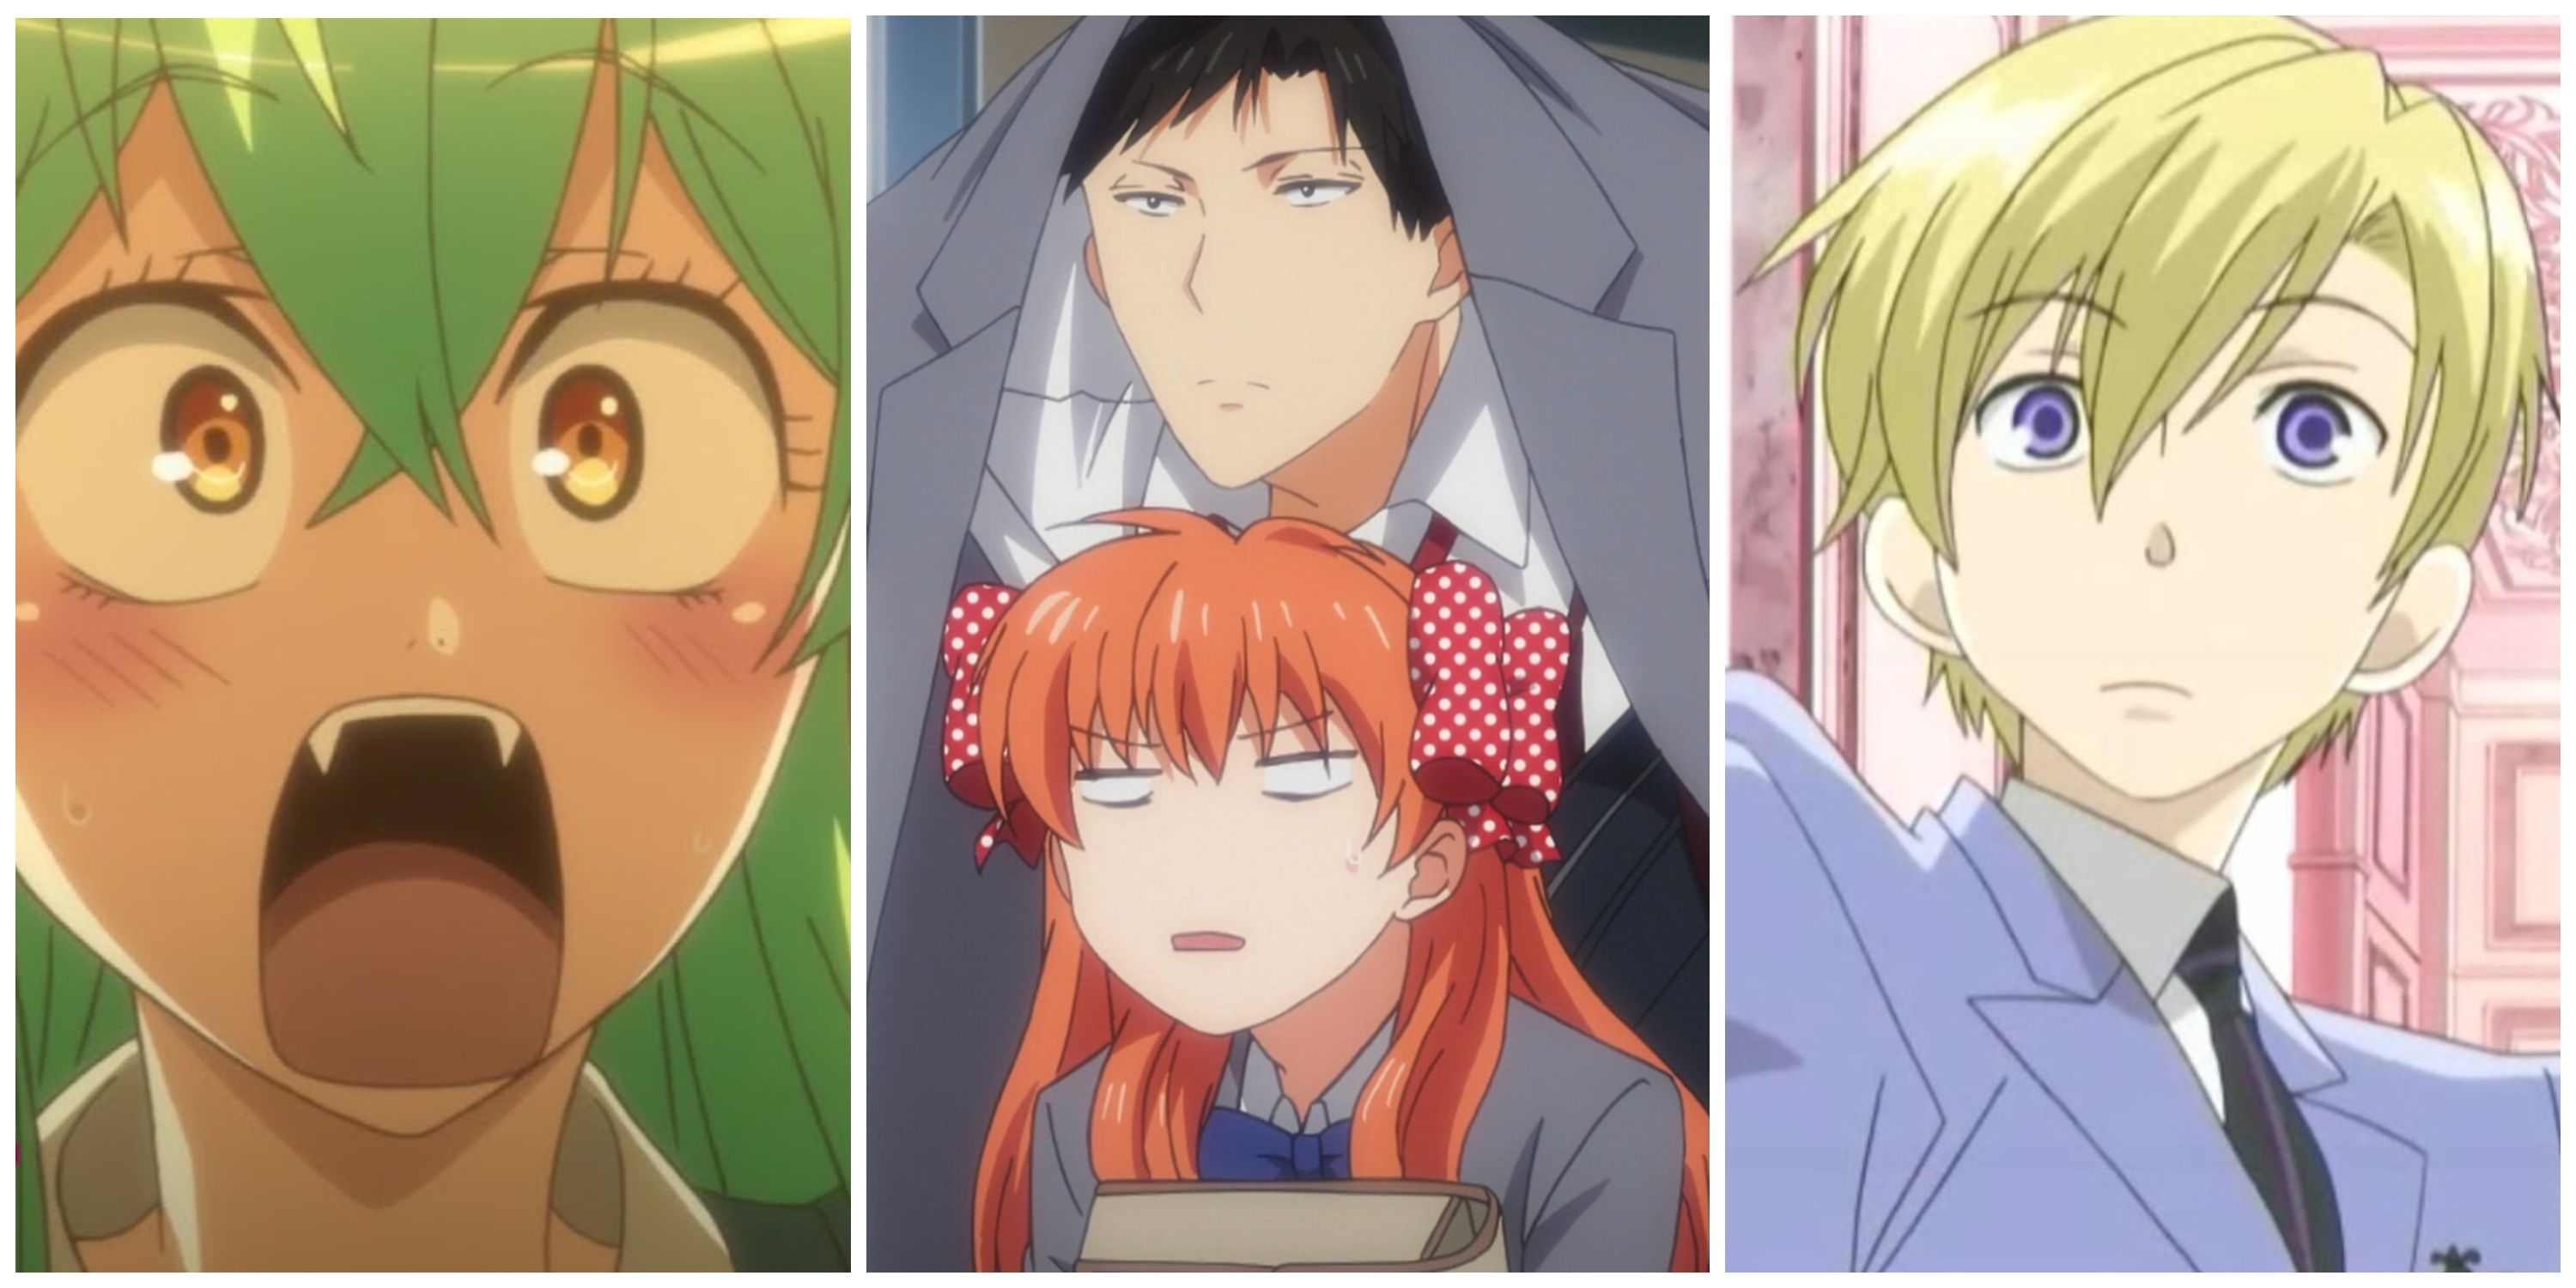 Split image, Youko from Actually I Am, Nokazi and Chiyo in Monthly Girls' Nozaki-kun, and Tamaki from Ouran High School Host Club.